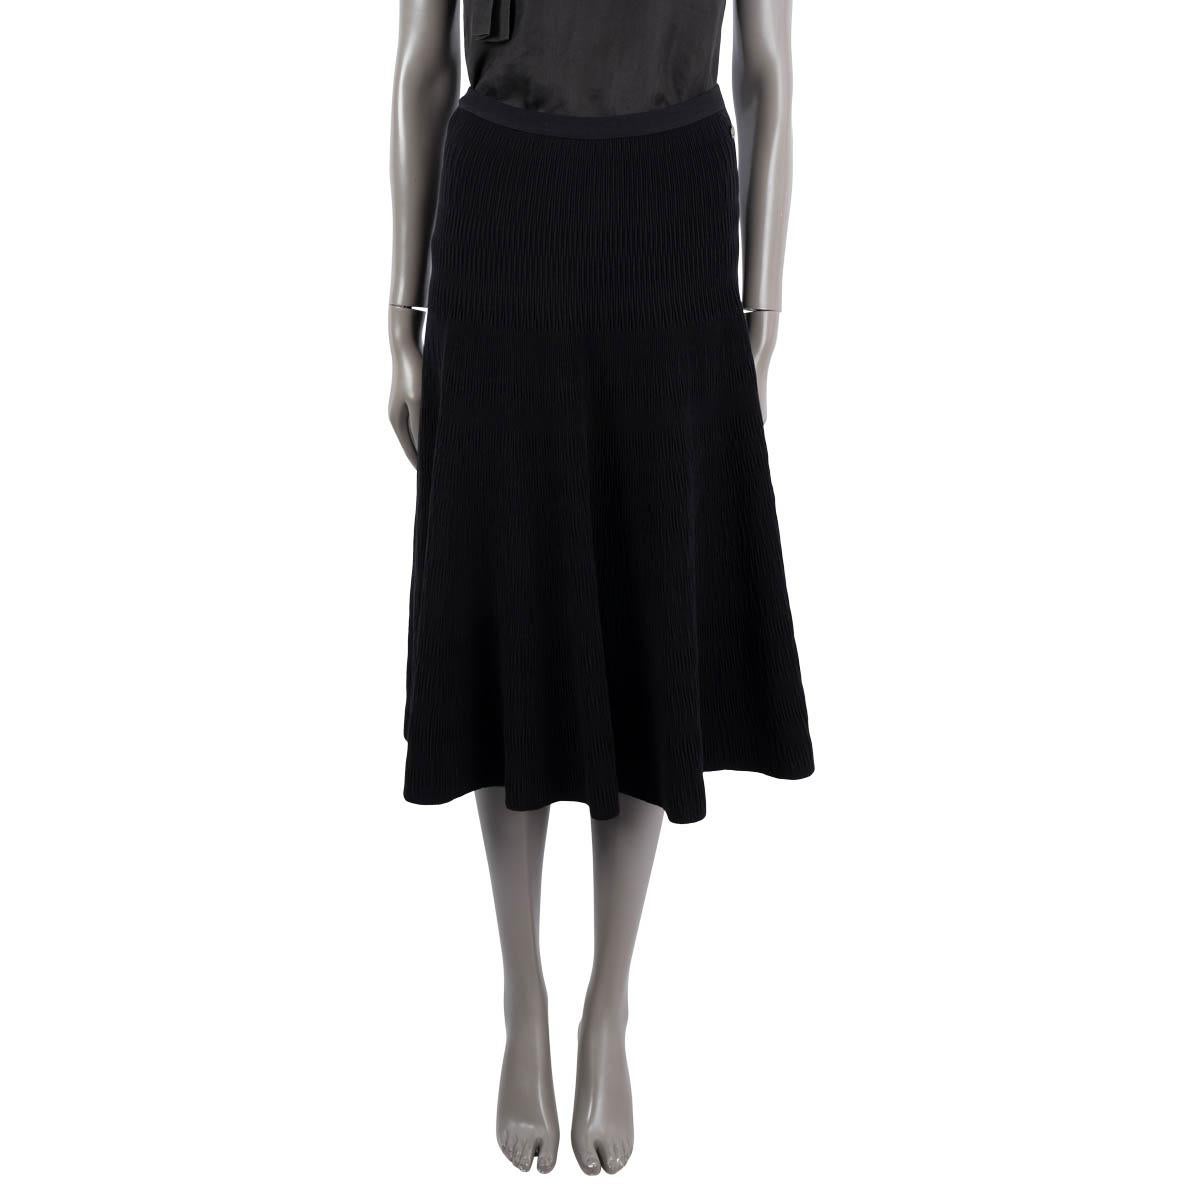 100% authentic Chanel textured knit skirt in black cotton (80%), polyamide (19%) and elastane (1%). Opens with a concealed zipper on the side. Unlined. Has been worn and is in excellent condition.

2016 Spring/Summer

Measurements
Model	Chanel16S